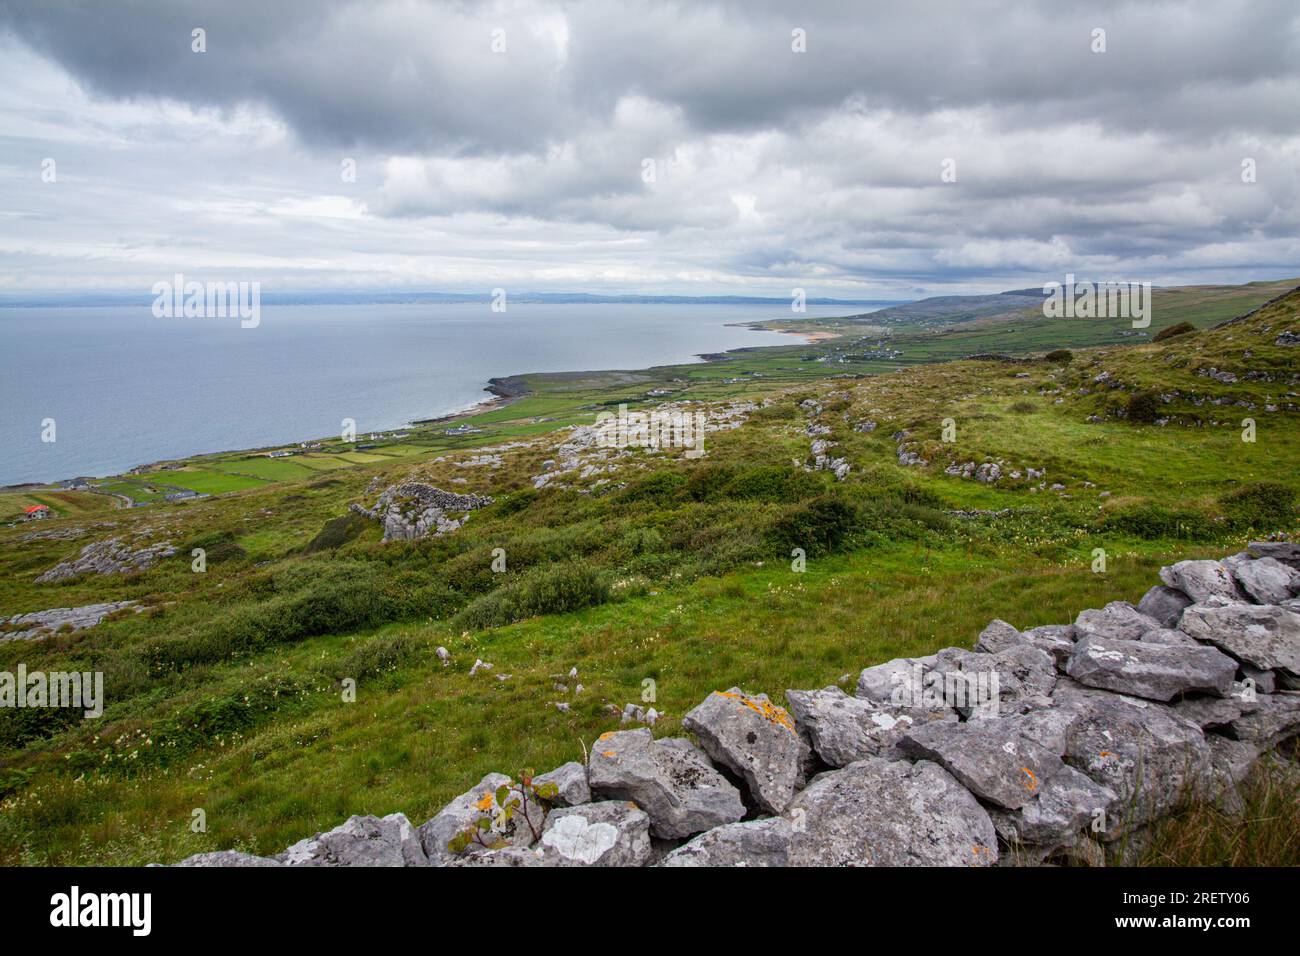 View of Fanore Beach and road to Galway from a vantage point high in the Burren. This photo was taken by myself at the end of July 2022, Stock Photo